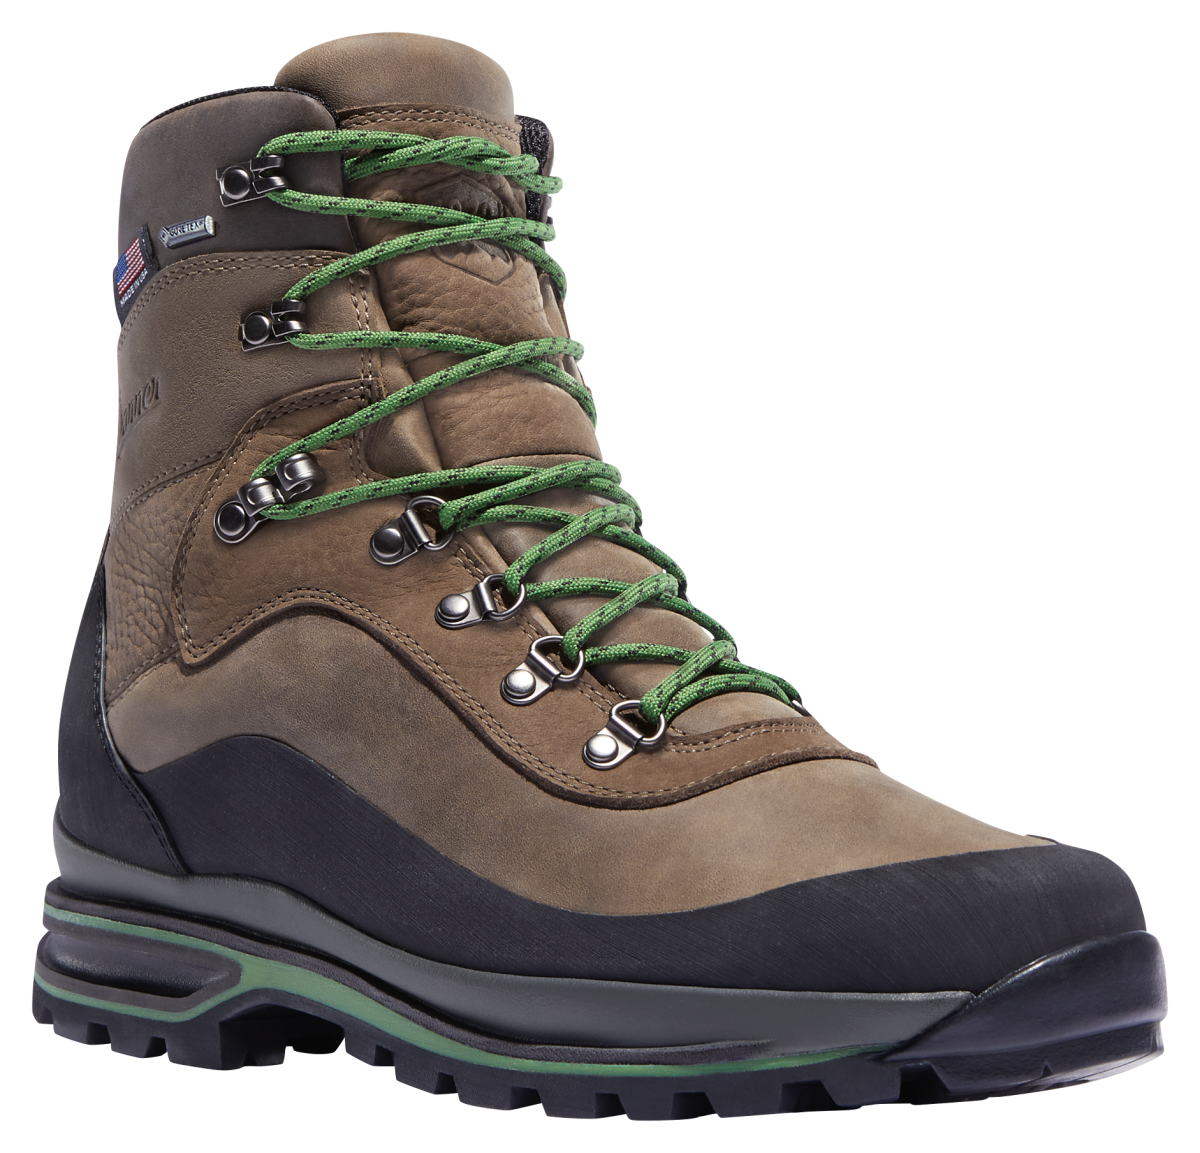 Danner Crag Rat USA GORE-TEX Hiking Boots for Men - Brown/Green - 8.5W